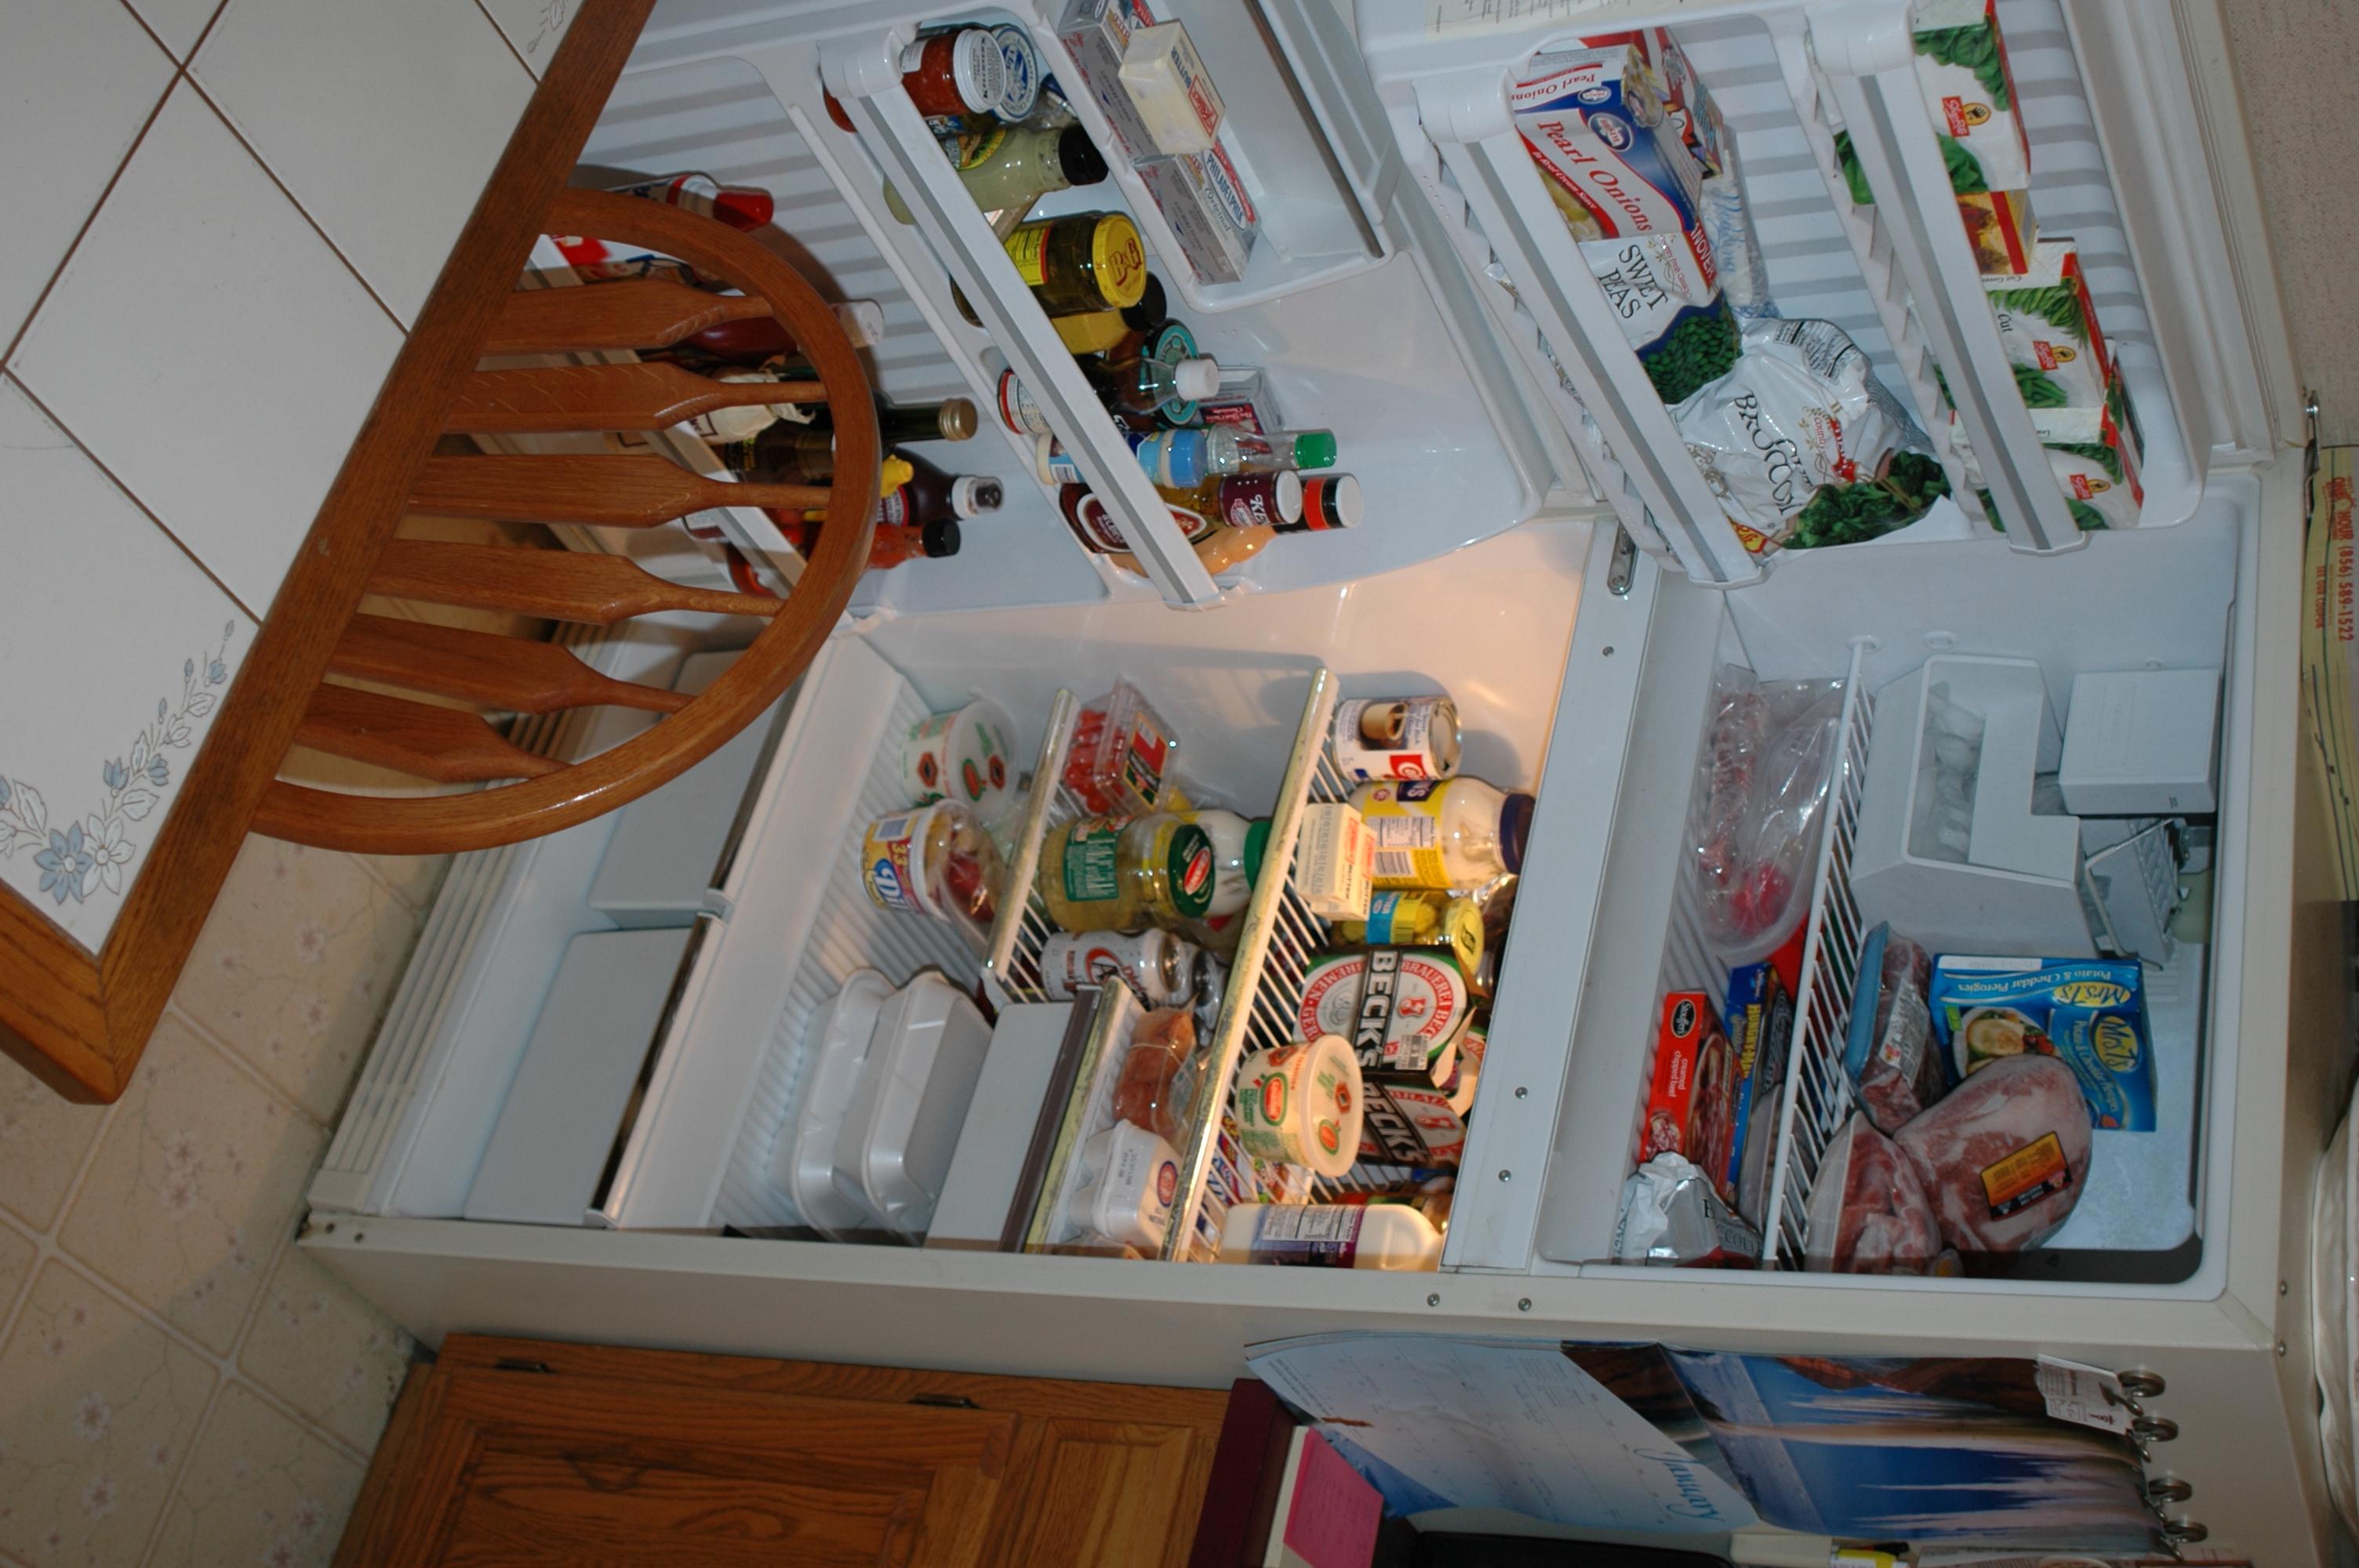 Do you know what's in your refrigerator and how long it's been there? Know what the dates on food means so you don't waste food. (Photo courtesy of vilhelm, Morguefile)